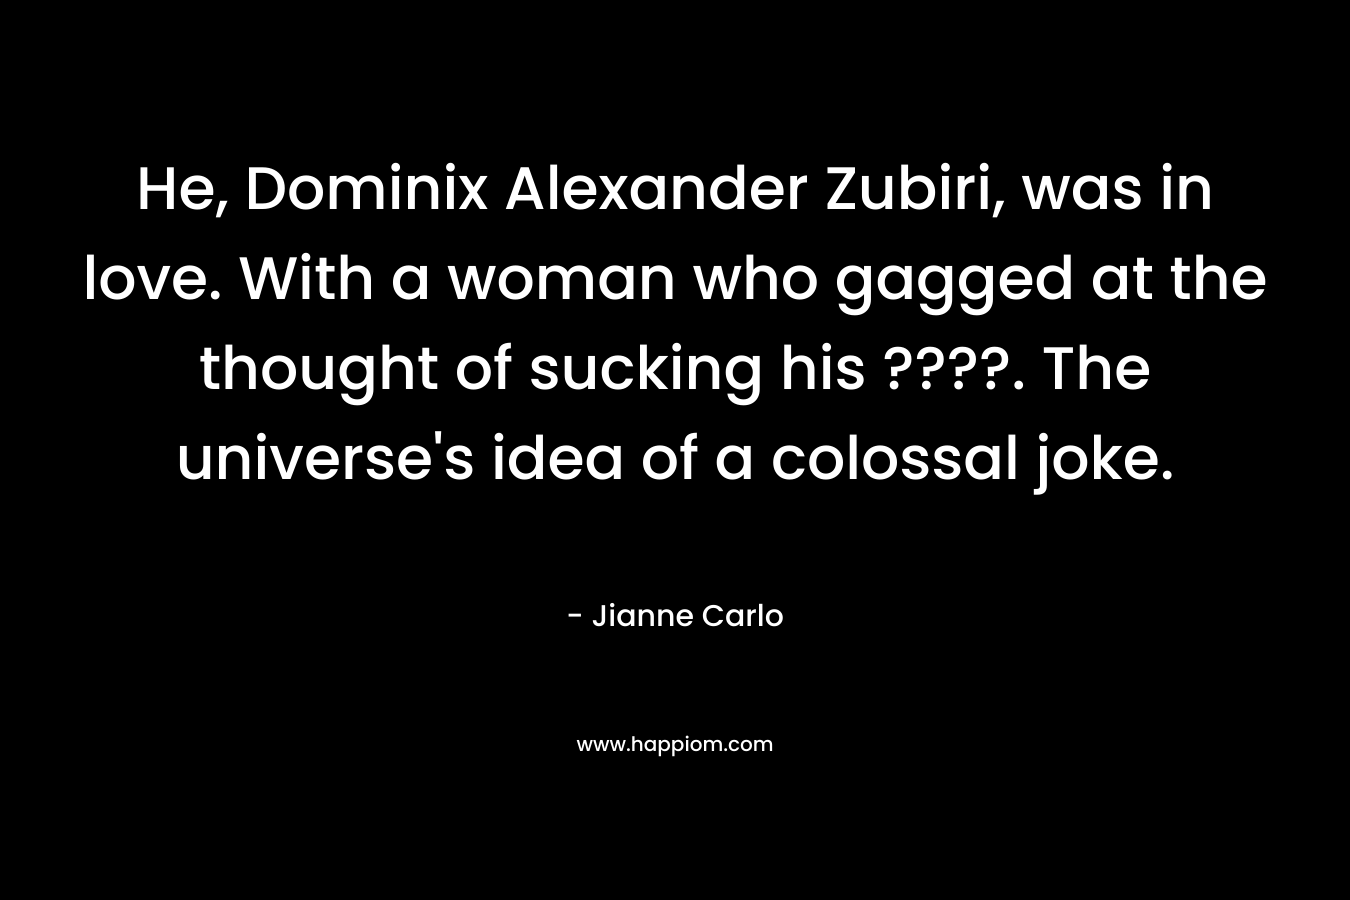 He, Dominix Alexander Zubiri, was in love. With a woman who gagged at the thought of sucking his ????. The universe’s idea of a colossal joke. – Jianne Carlo